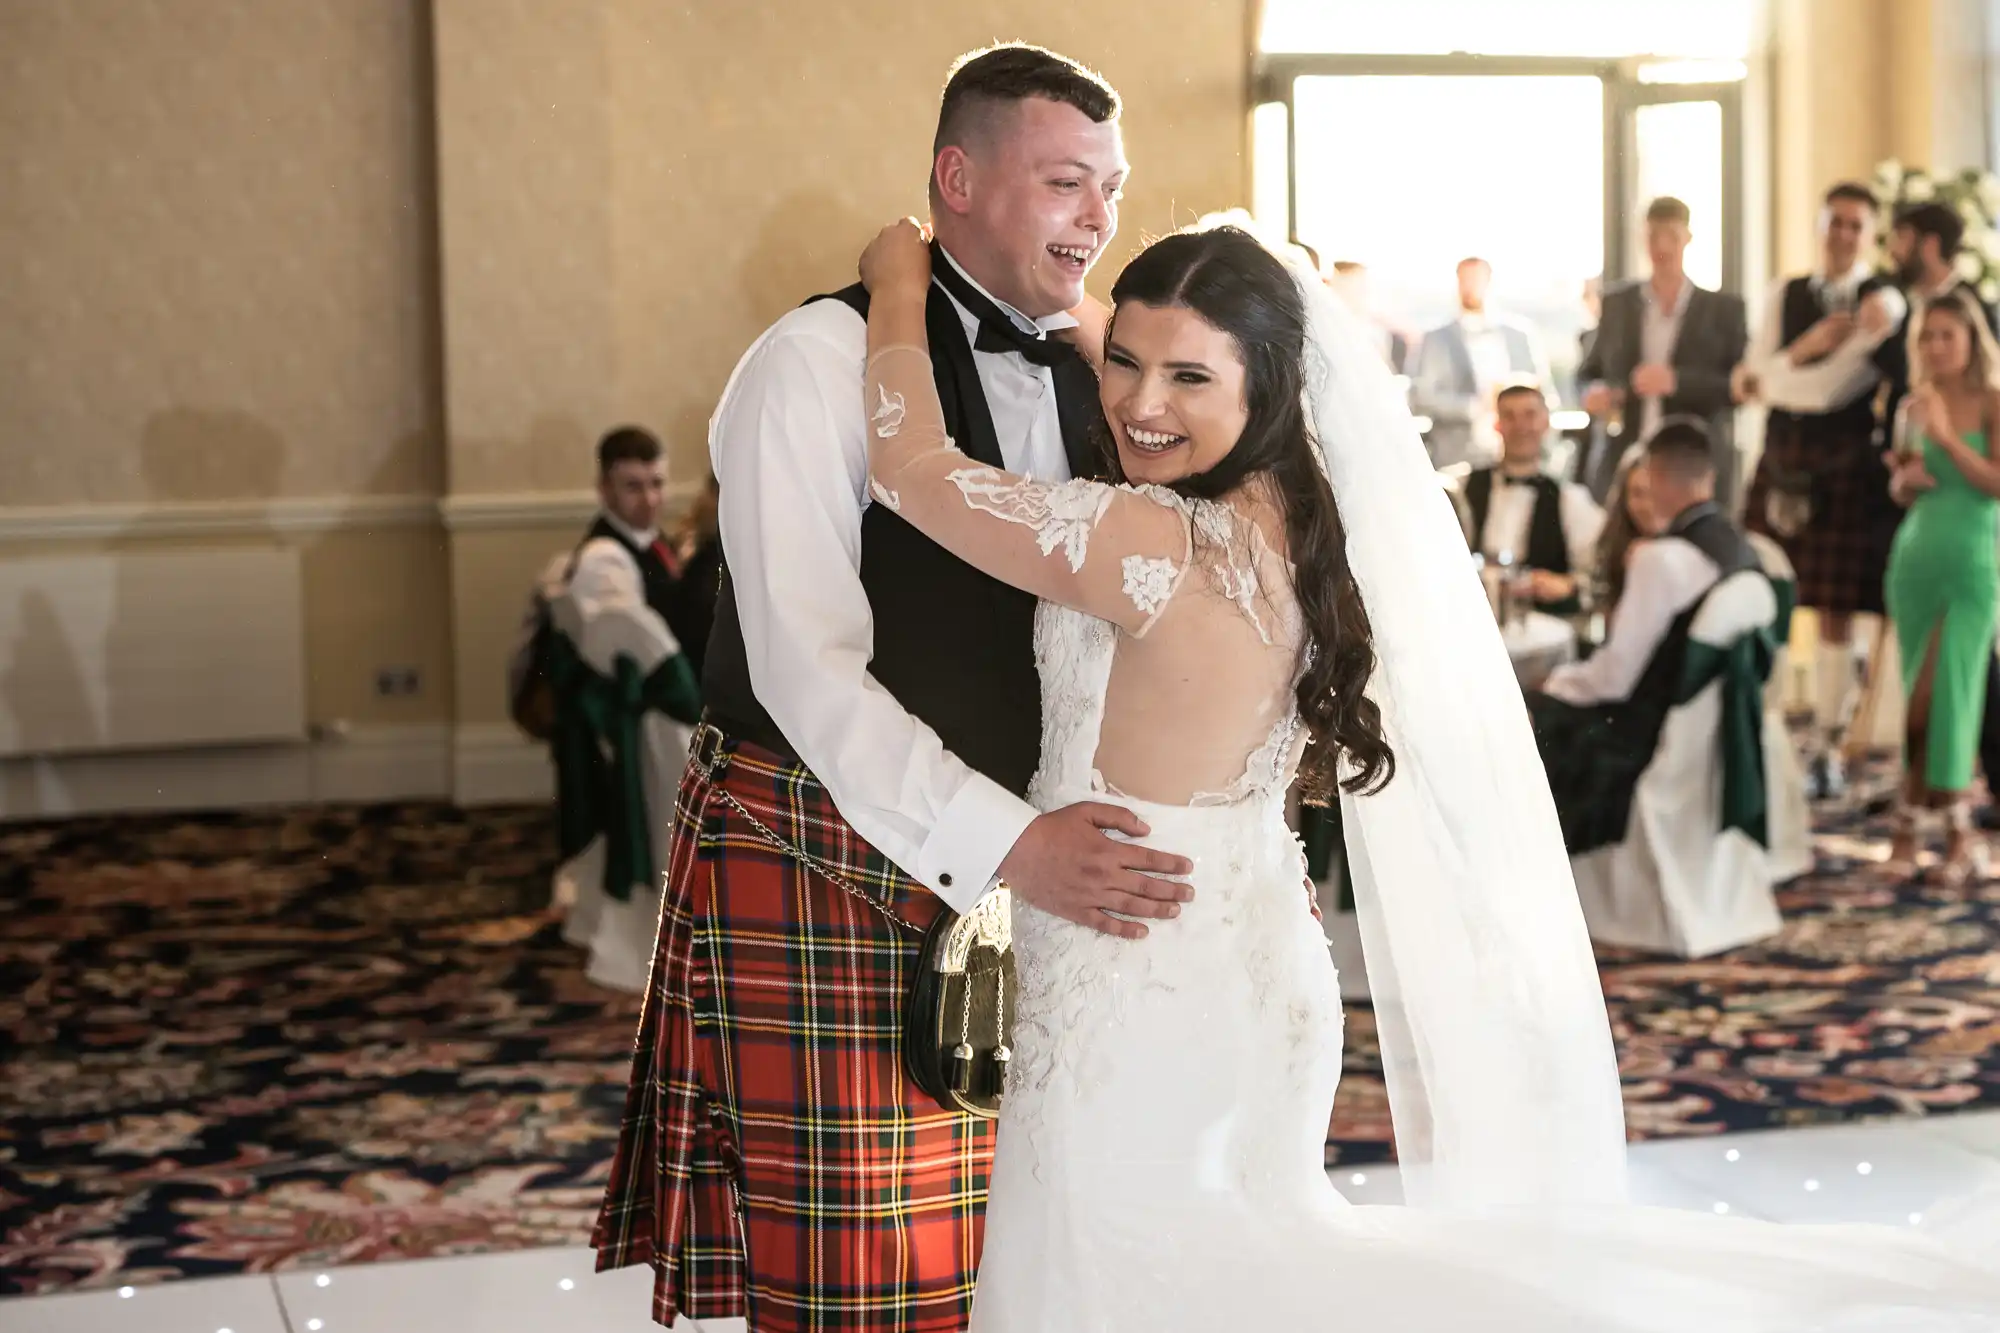 A bride and groom smile and embrace on the dance floor, surrounded by guests. The groom wears a tartan kilt, and the bride is in a lace gown.